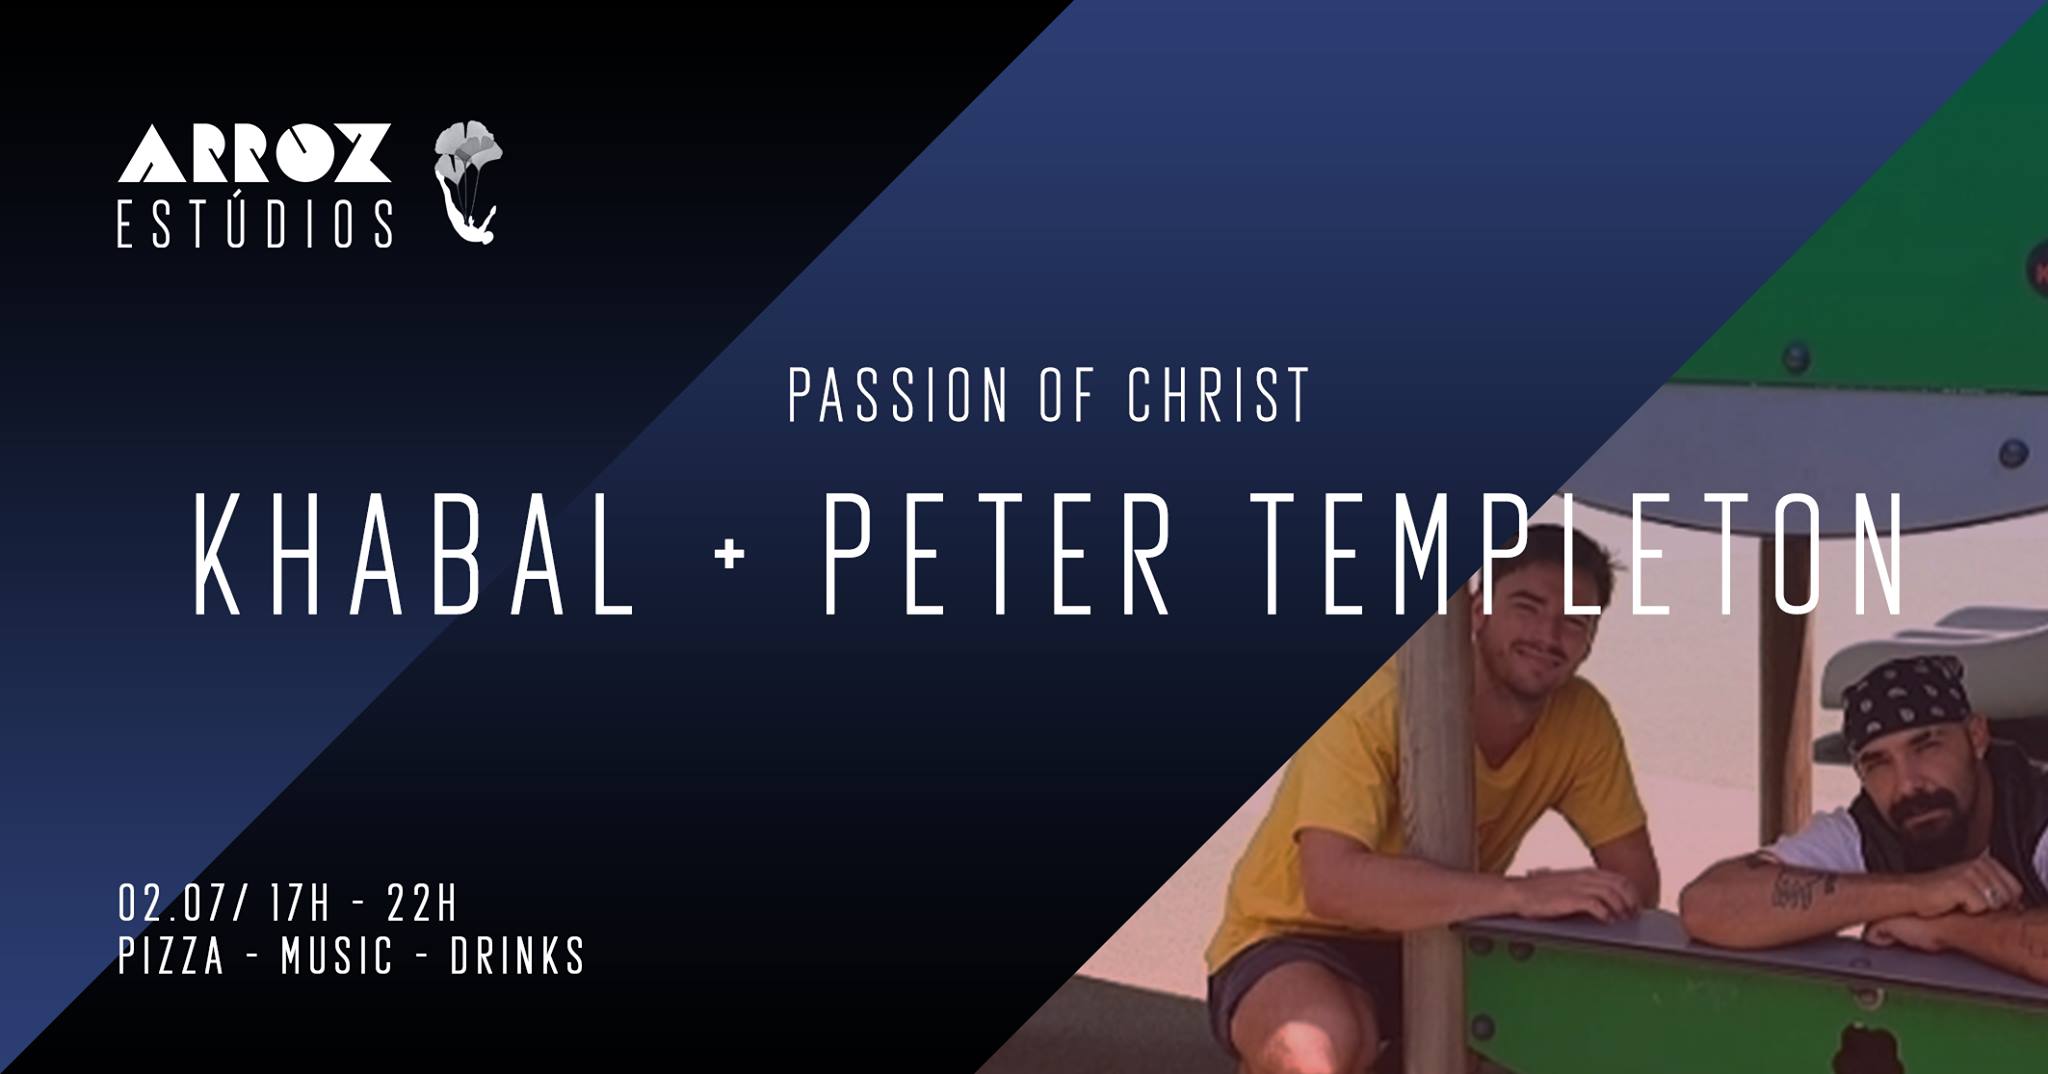 Khabal + Peter Templeton - Passion of Christ